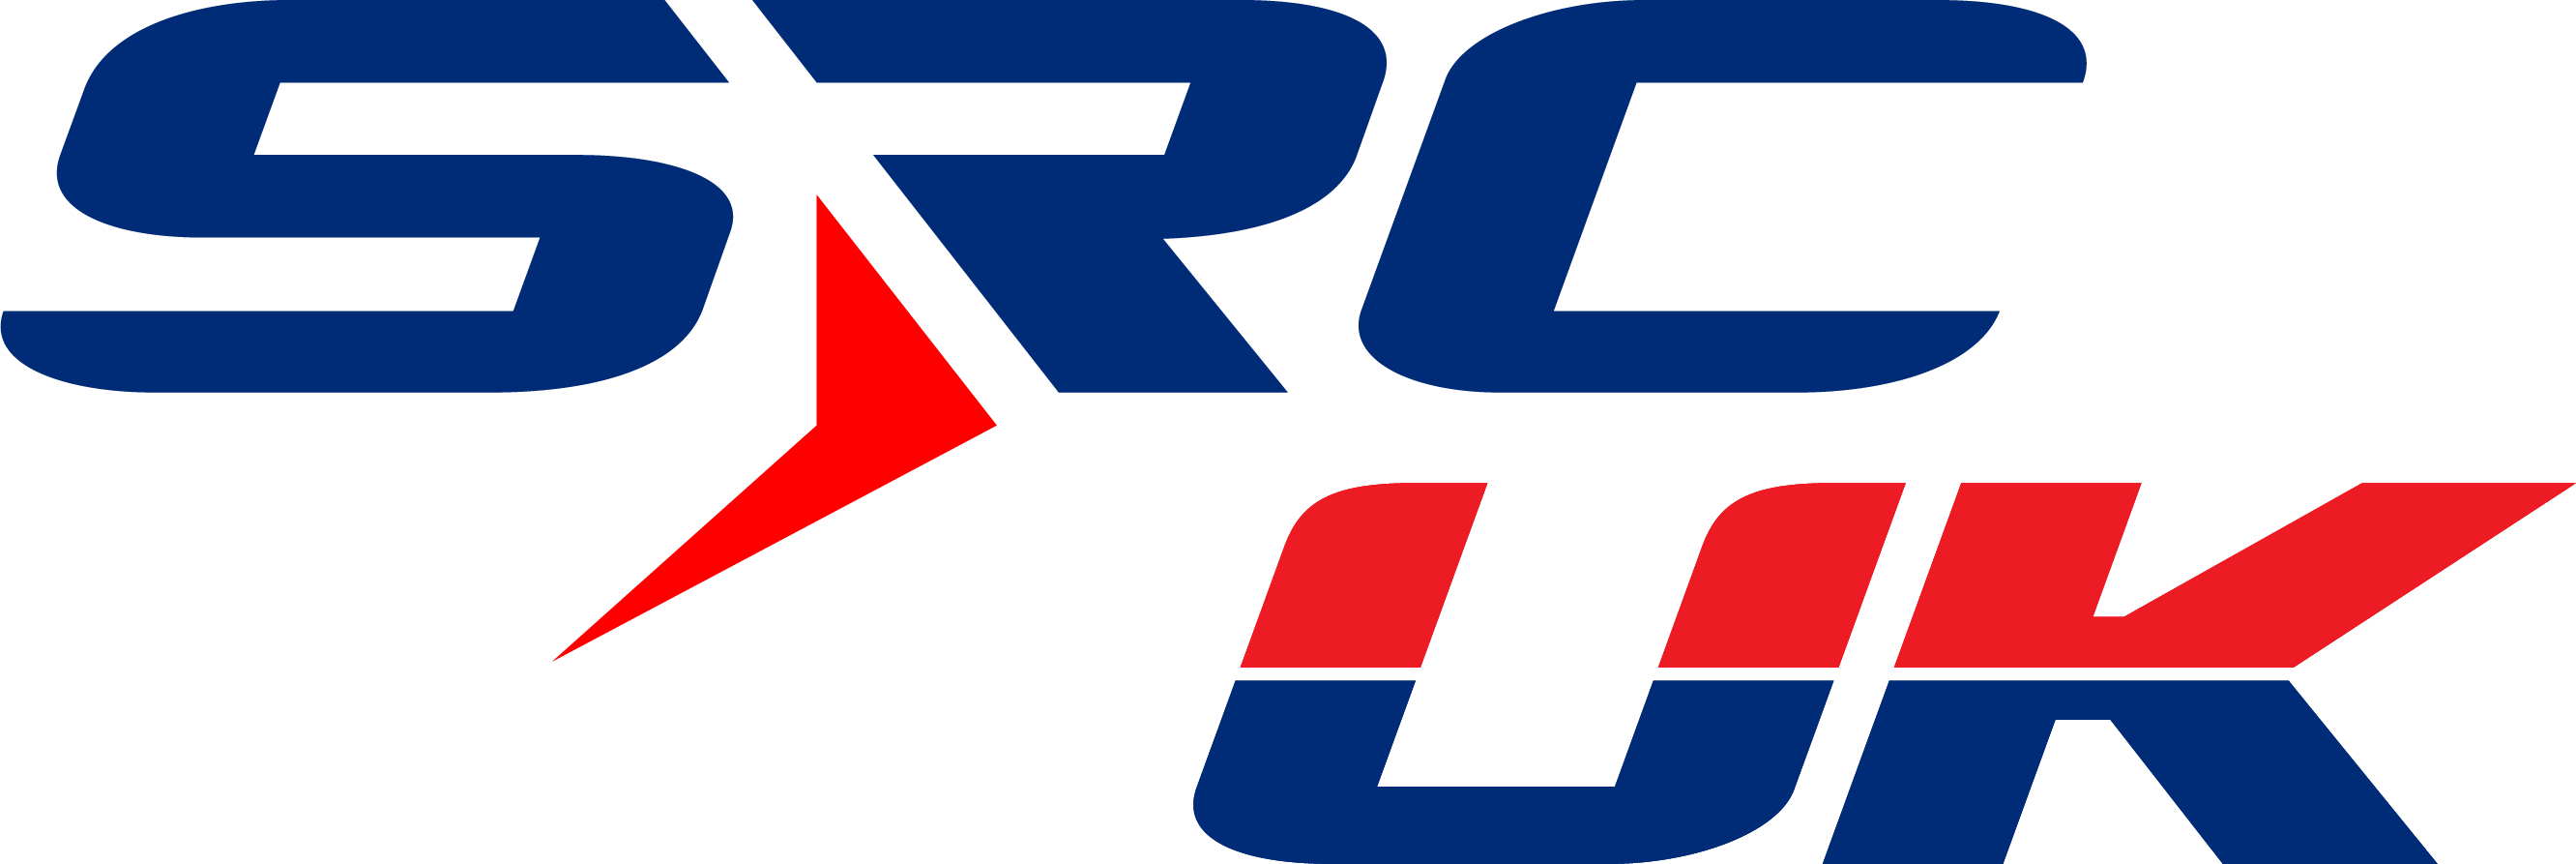 SRC UK Logo with blue SRC, red arrow mark and red and blue UK